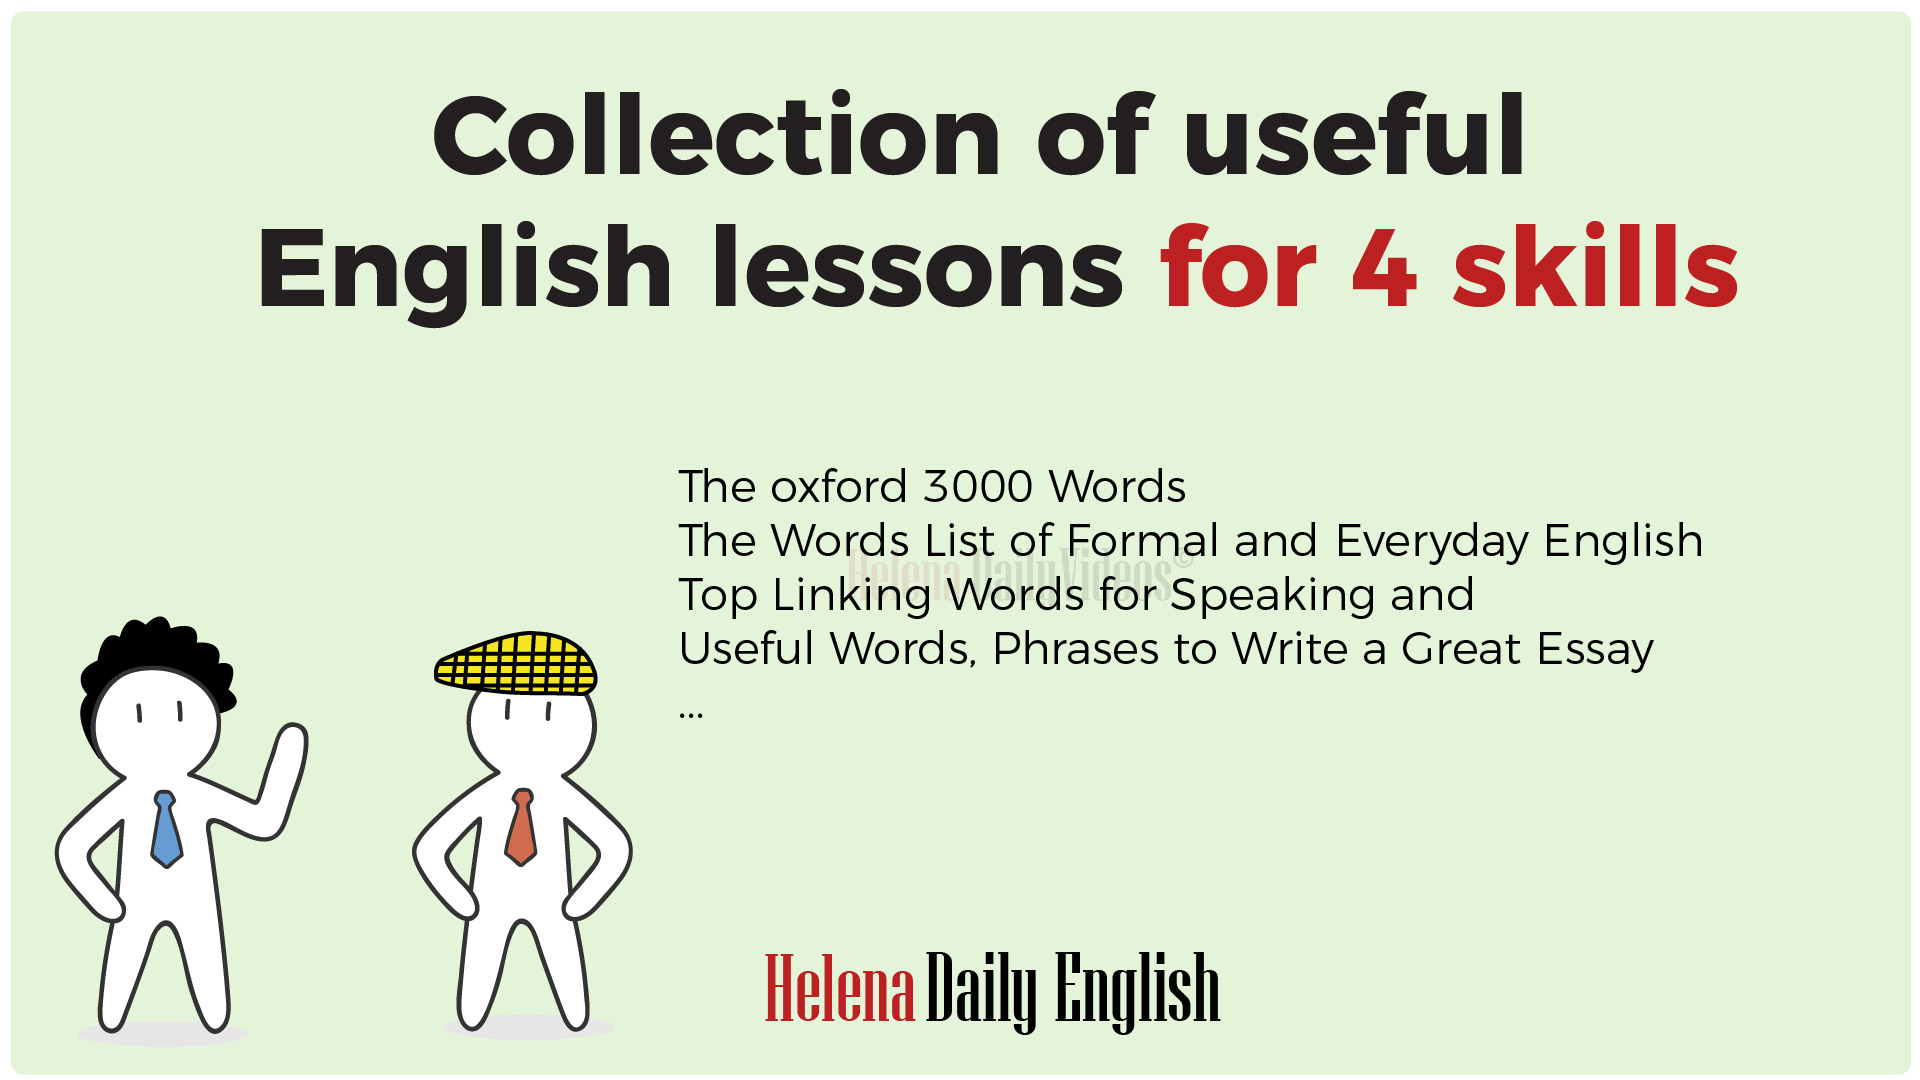 Collection of useful English lessons for 4 skills: Most viewed English lessons and Tips